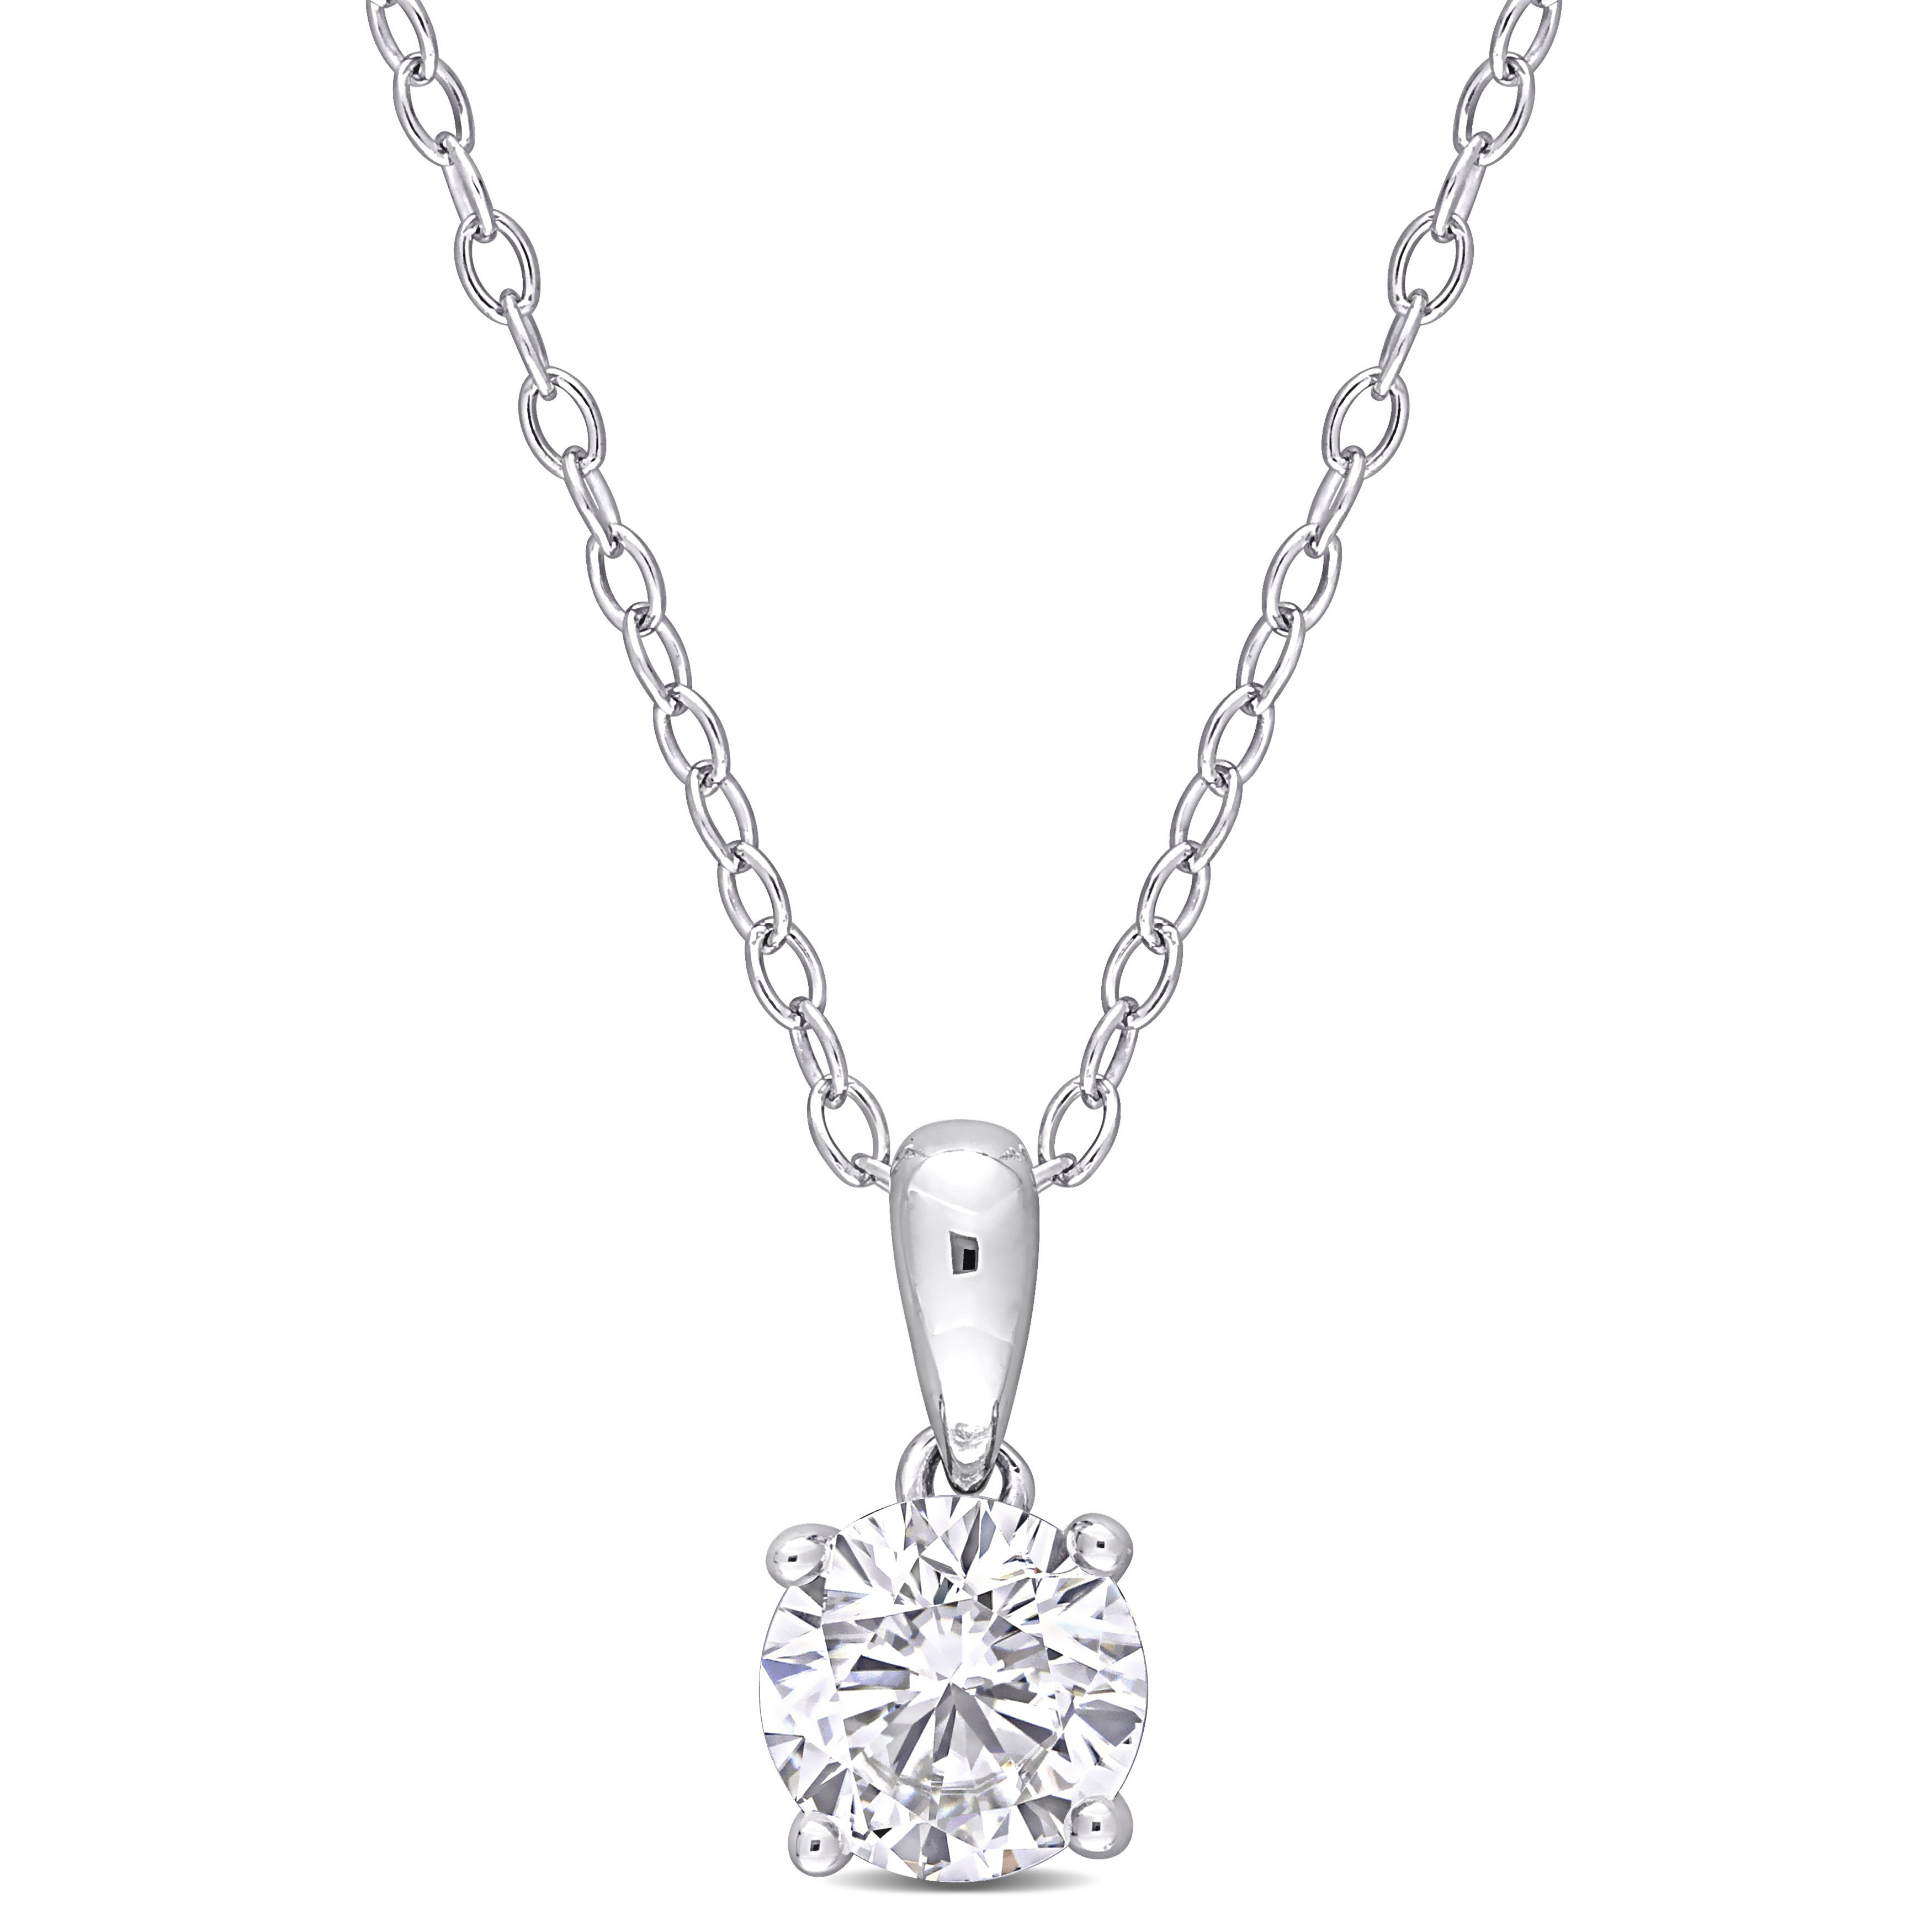 1 CT TGW Created White Sapphire Solitaire Heart Design Pendant with Chain in Sterling Silver - 18 in.